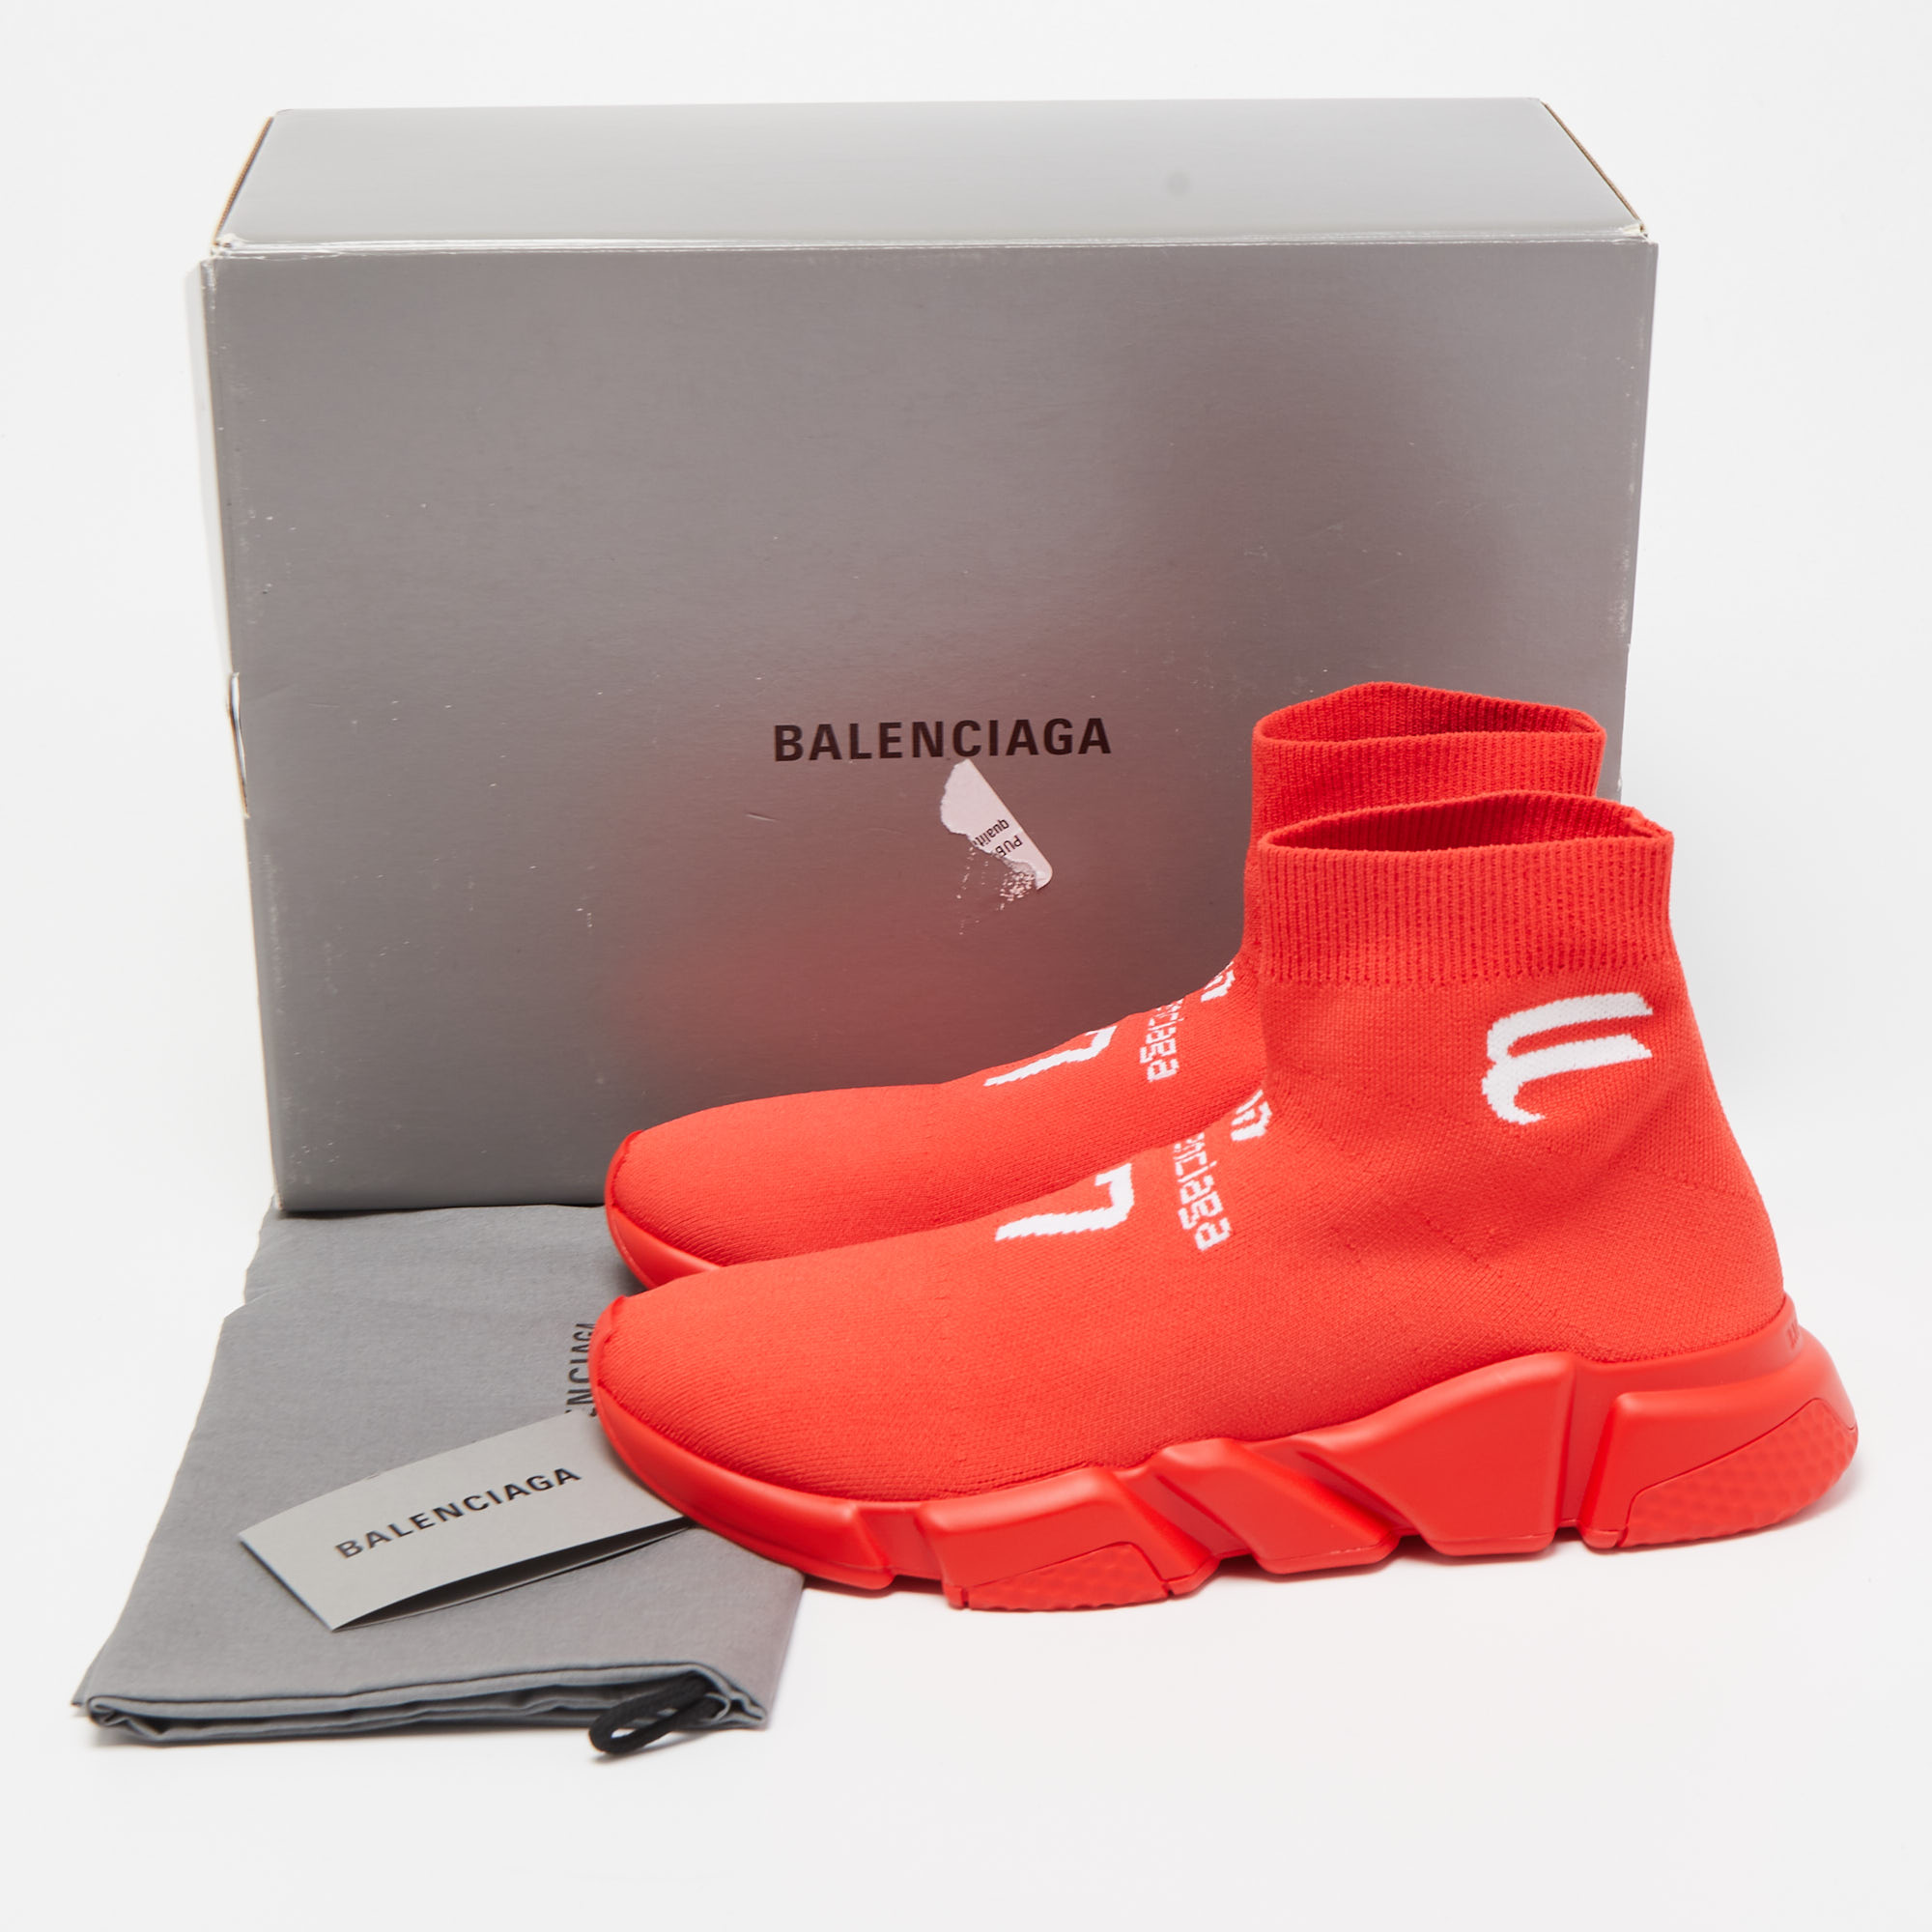 Balenciaga Red Knit Fabric Speed LT Soccer Sneakers Size 42